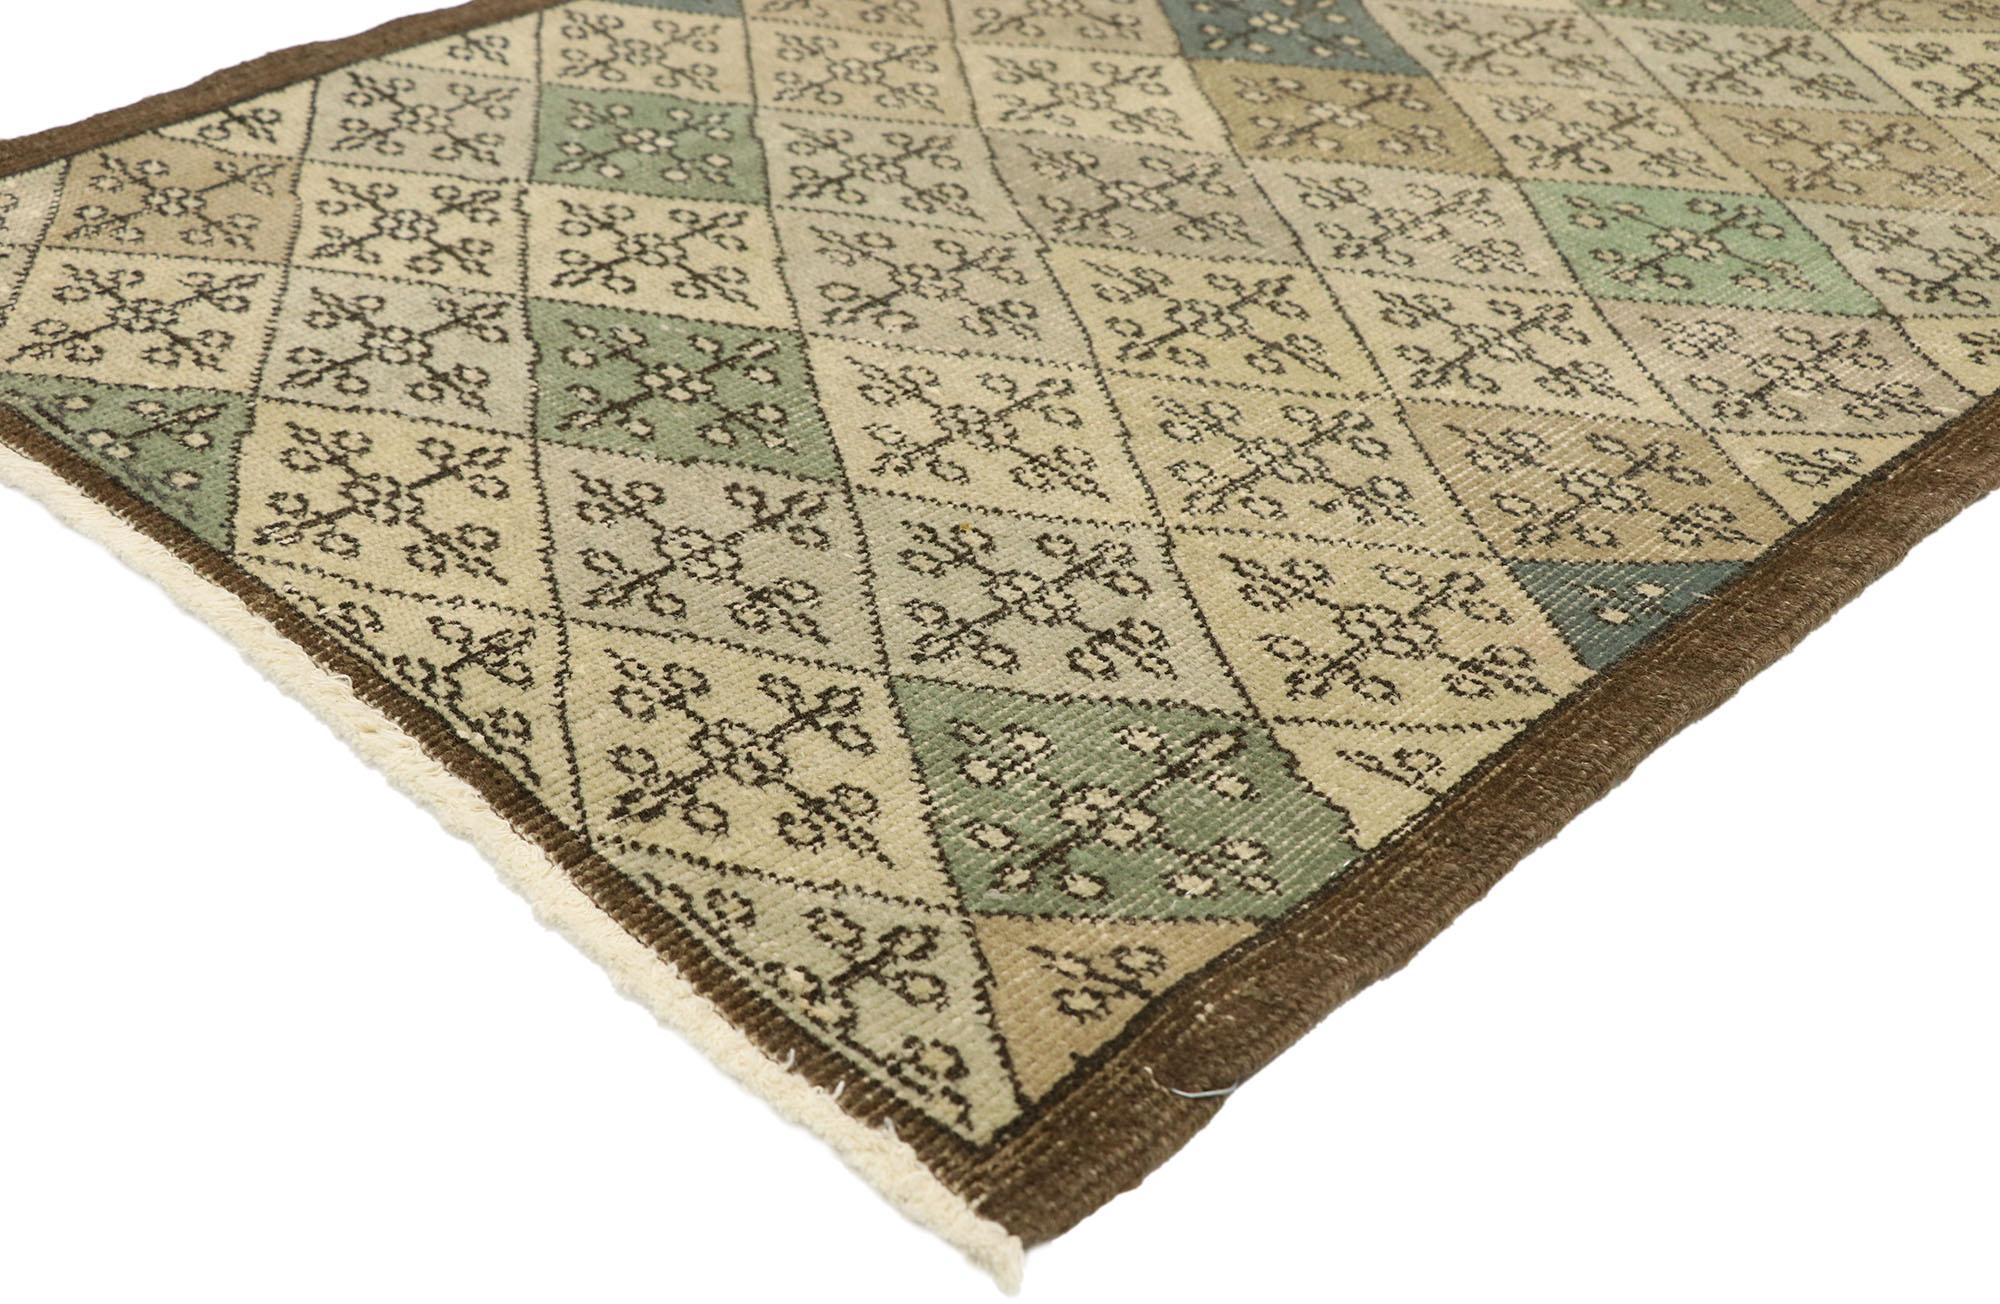 51011 Zeki Muren distressed vintage Turkish Sivas rug with Swedish Farmhouse style 02'09 X 06'05. Lovingly timeworn with Gustavian grace, this hand knotted wool distressed Turkish Sivas rug beautifully embodies a Swedish Farmhouse style. The field